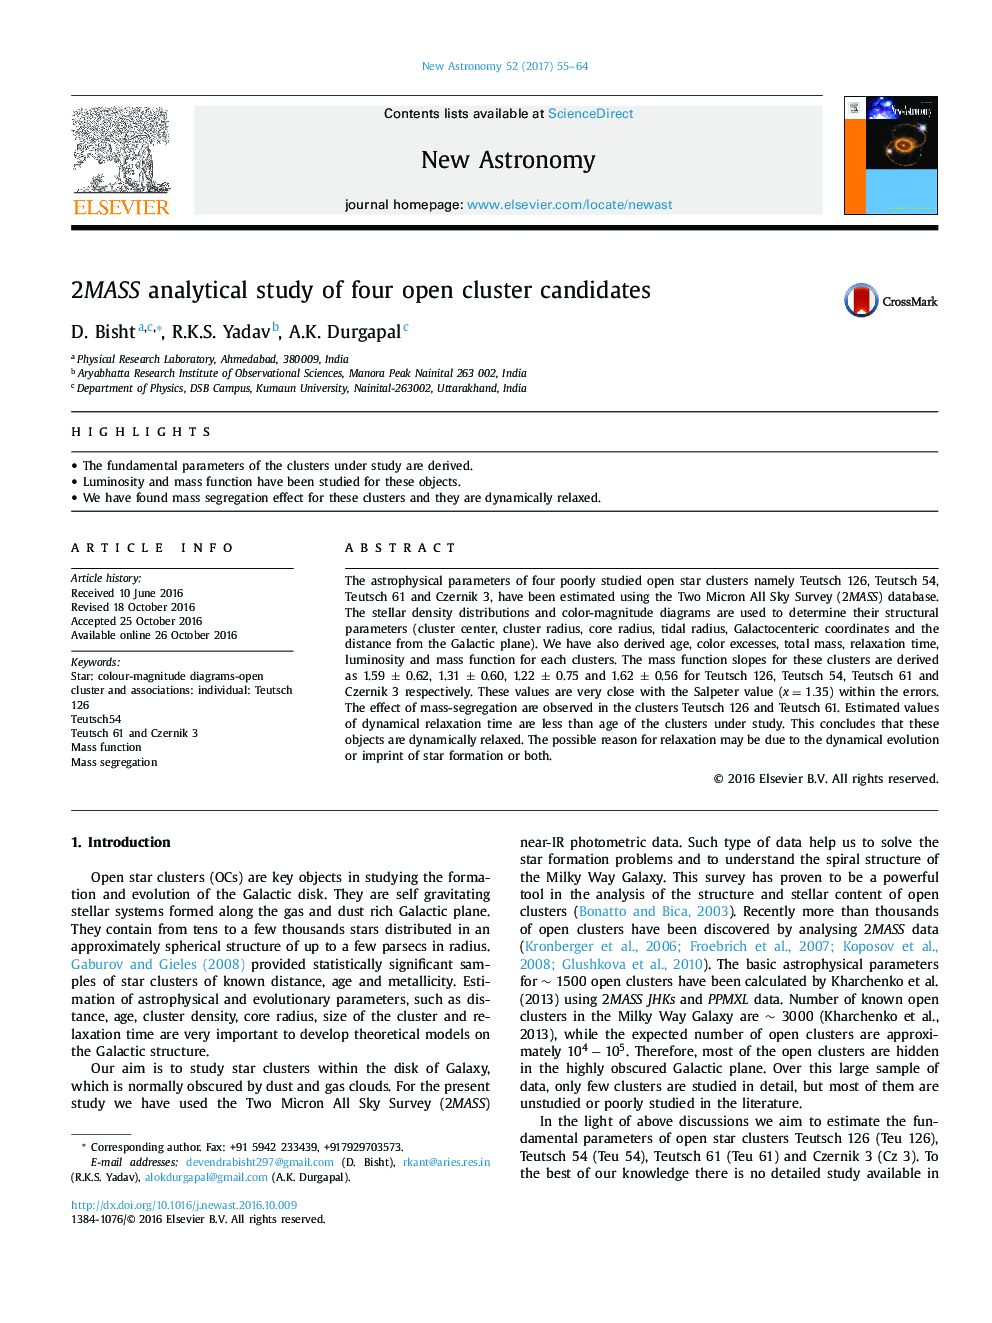 2MASS analytical study of four open cluster candidates